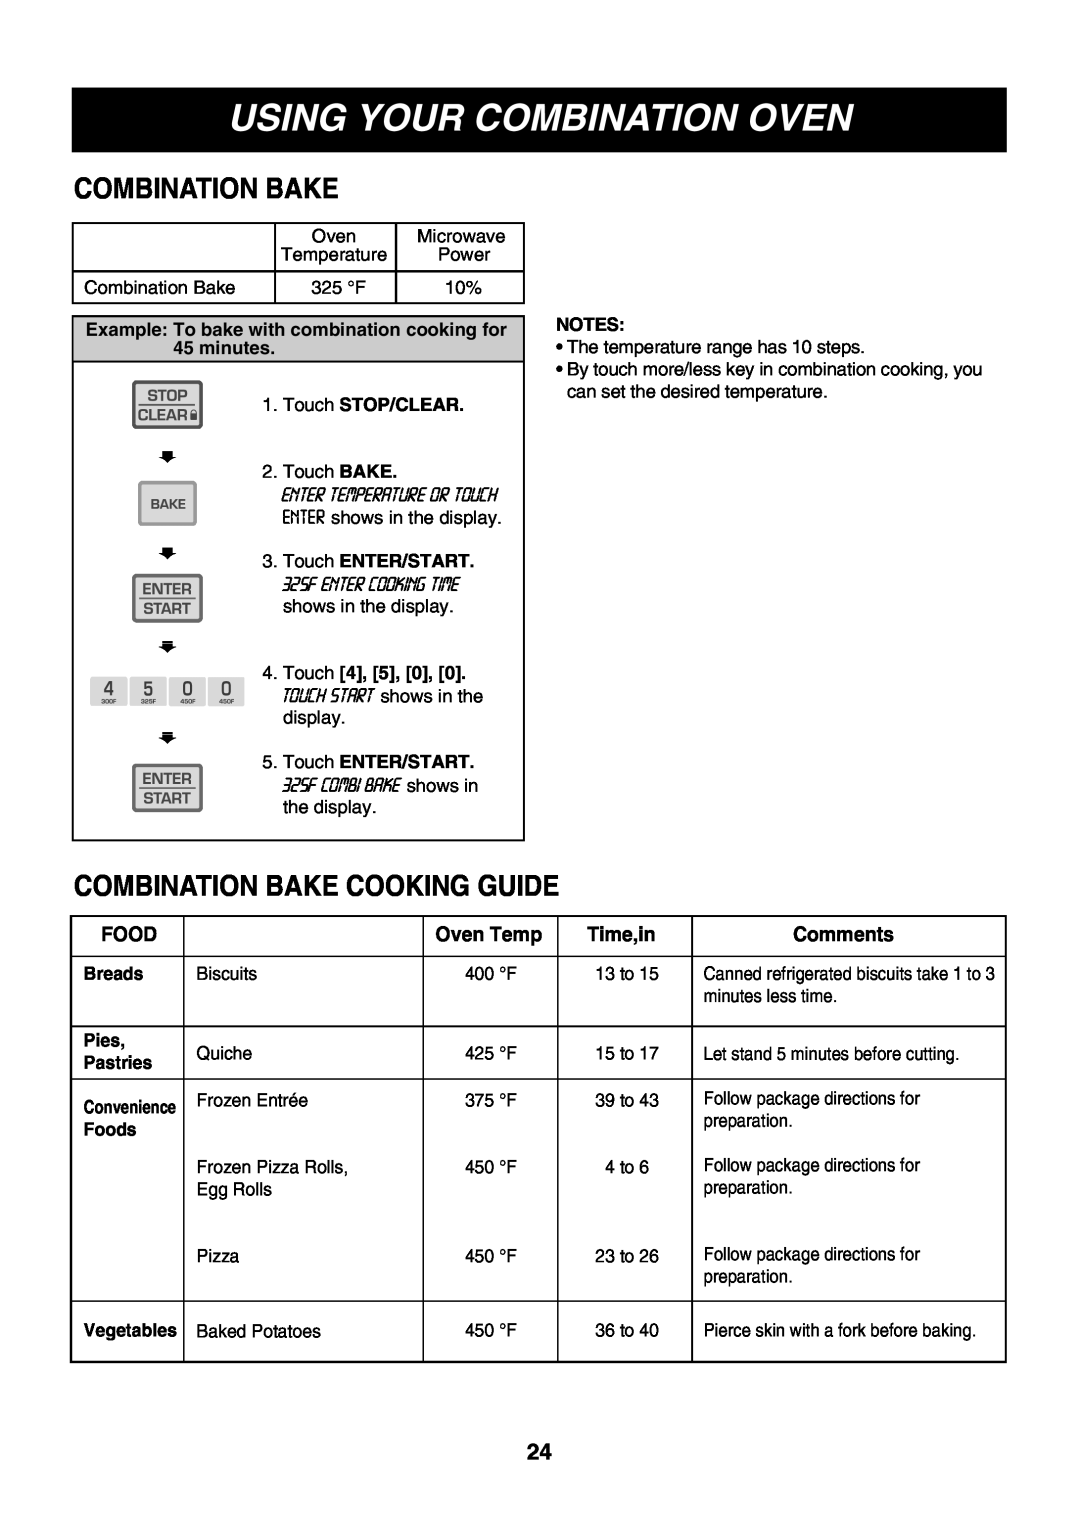 LG Electronics LMH1017CVB Combination Bake Cooking Guide, Time,in, Using Your Combination Oven, Food, Oven Temp, Touch 